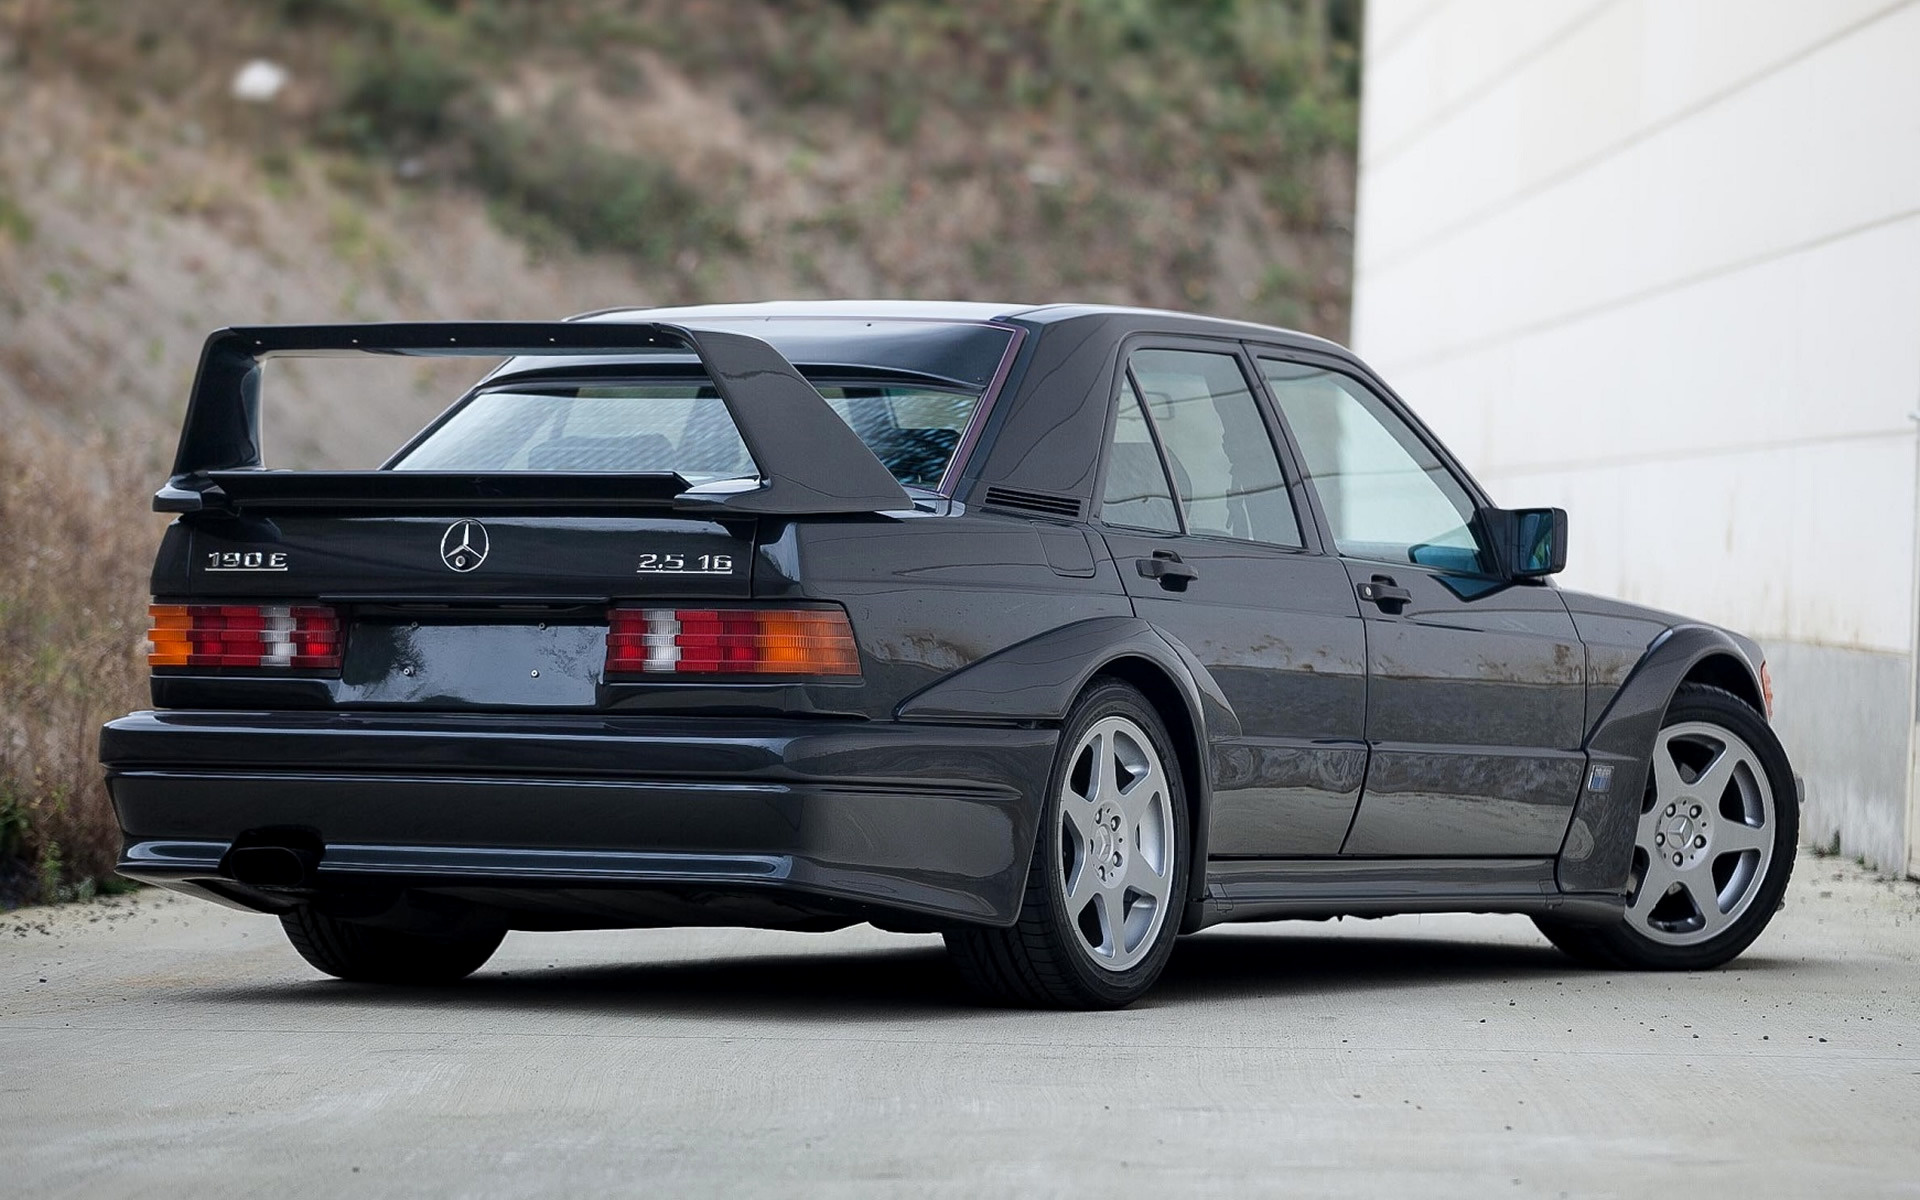 1990 Mercedes-Benz 190 E 16v Evolution II - Wallpapers and HD Images